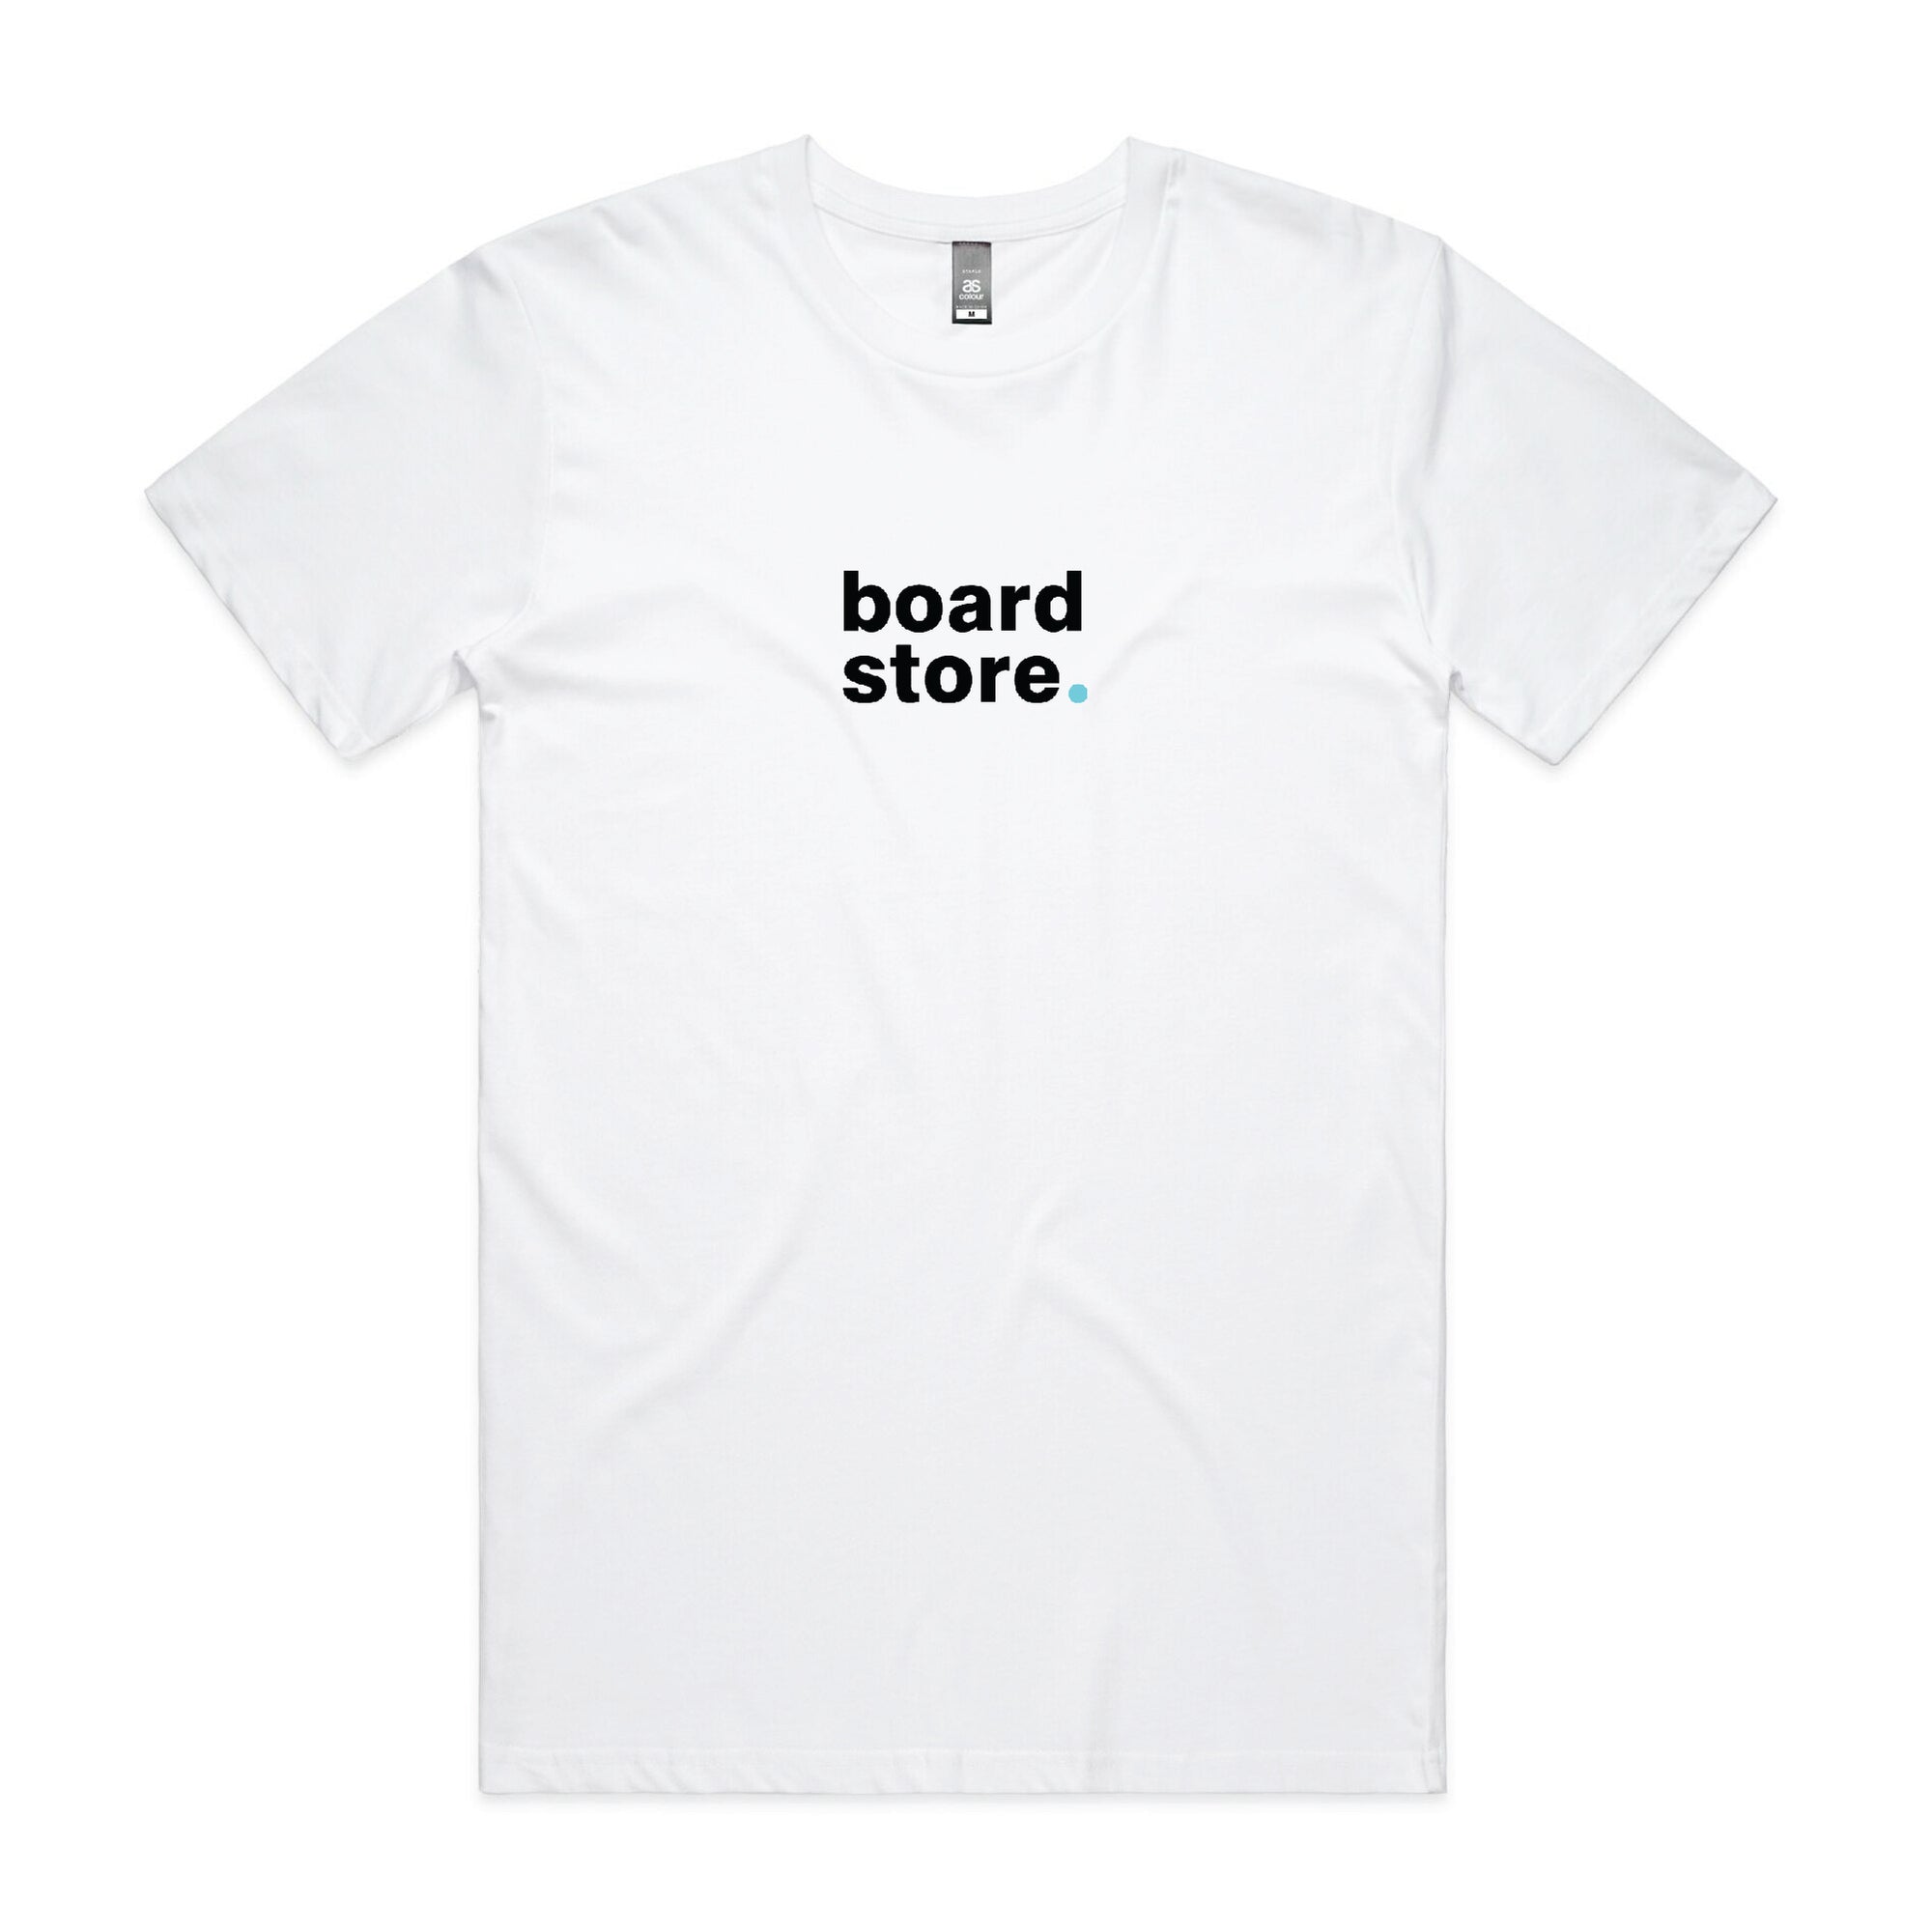 Boardstore Centre Stacked Youth Tee - White - Board Store Board StoreTee Shirt  